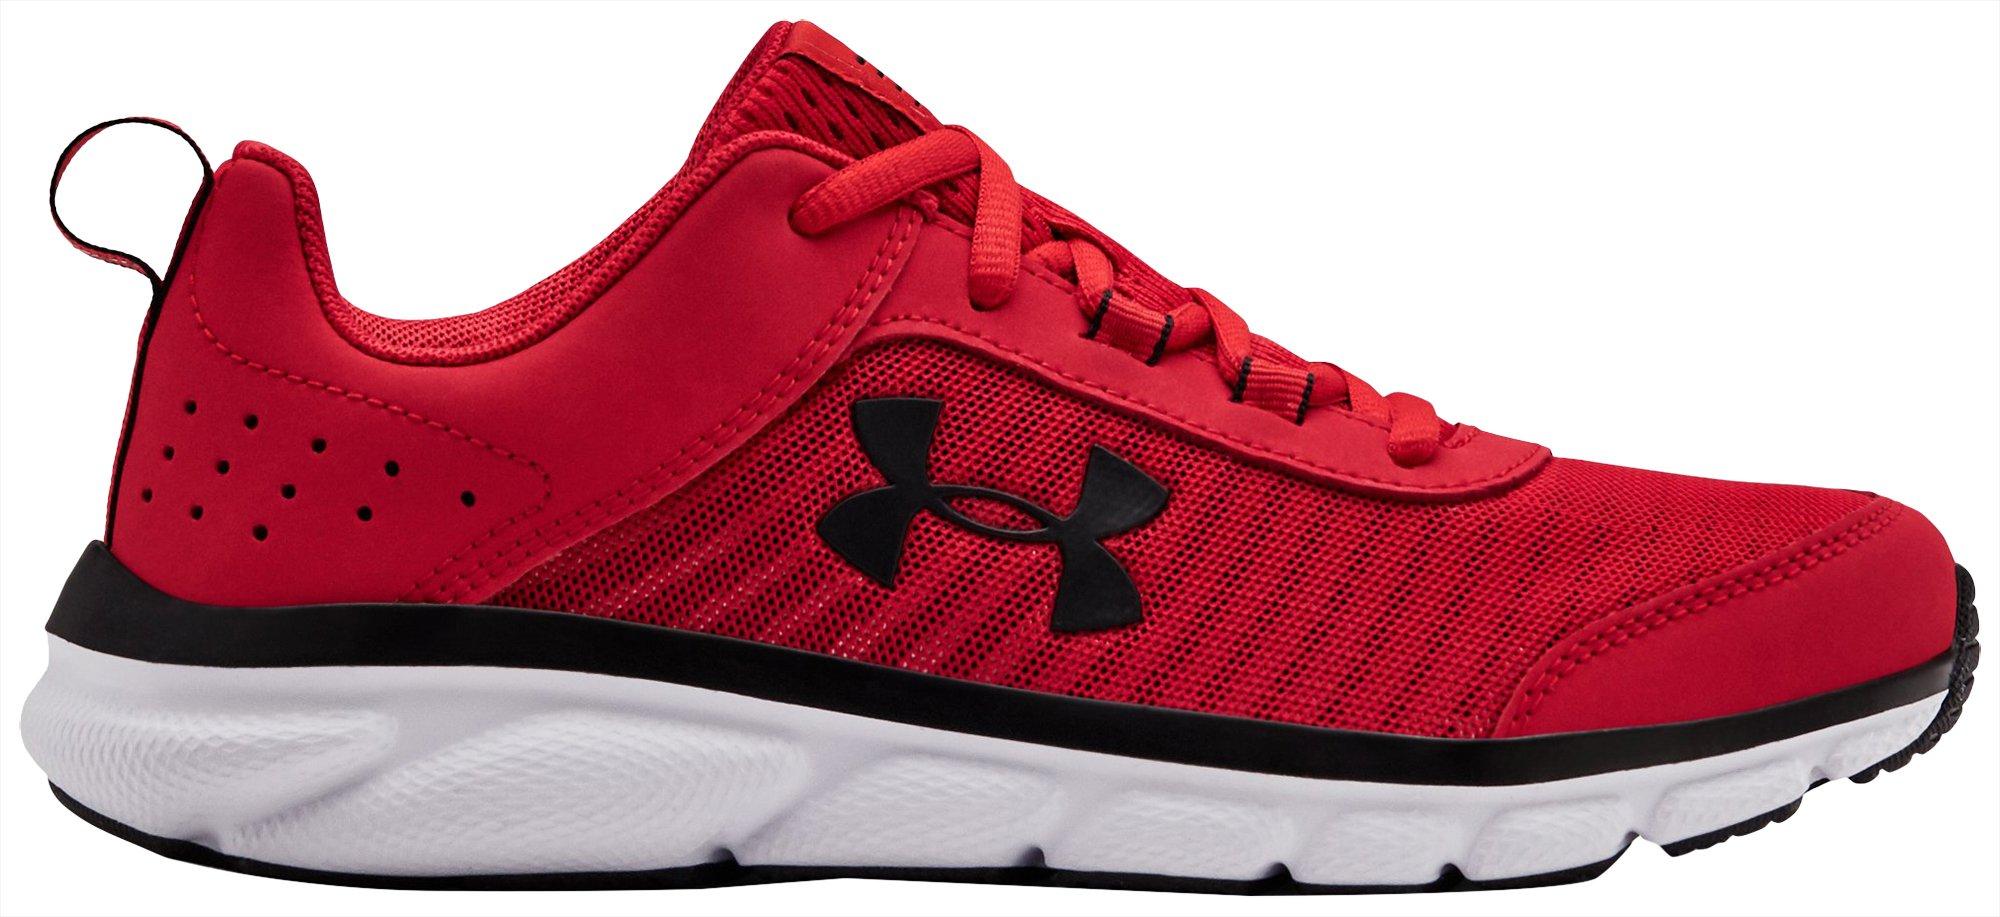 Red Boys Shoes | Bealls Florida